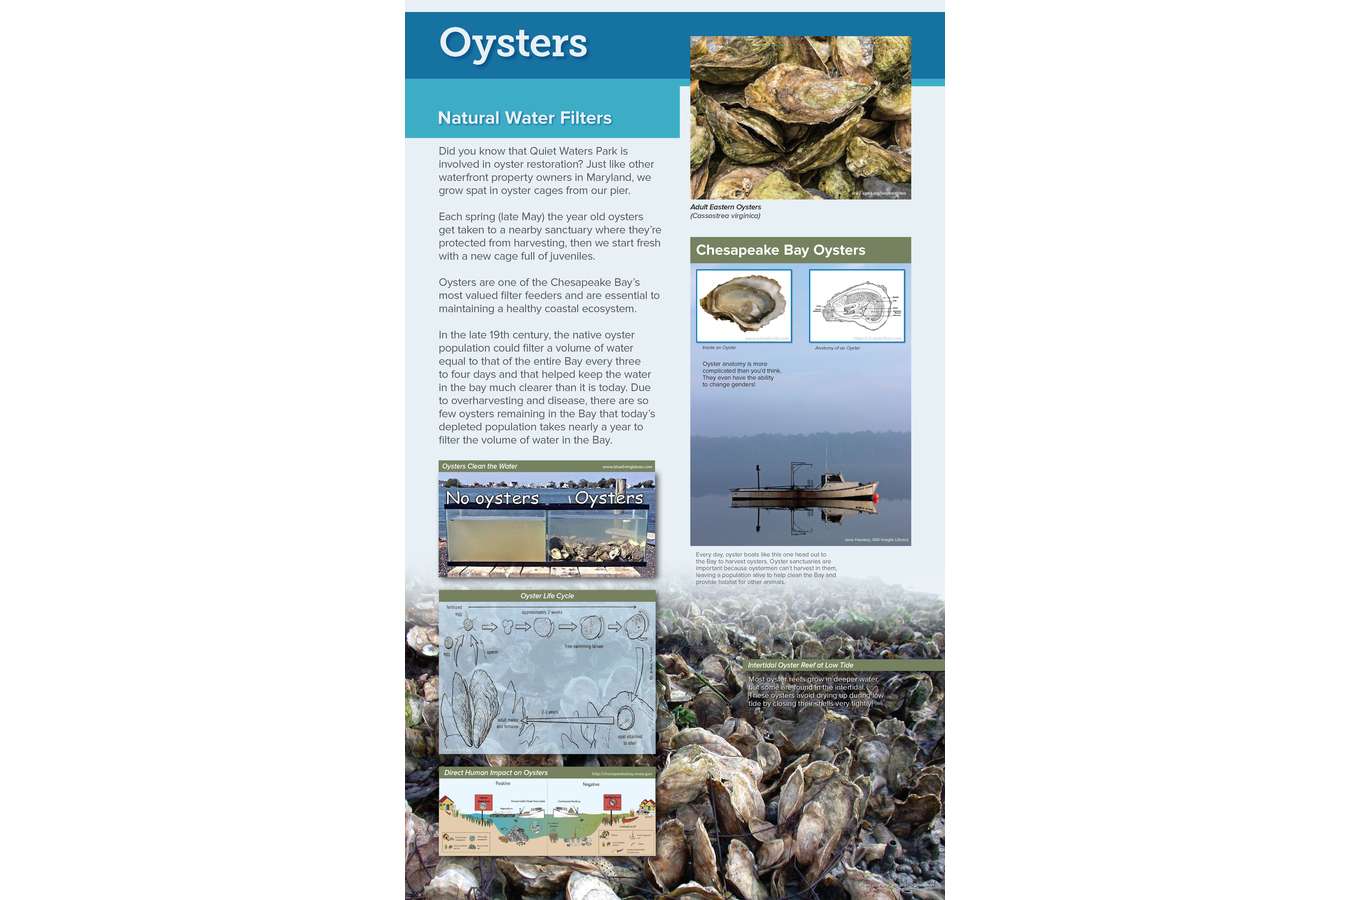 11G 2E2.A QWP Oysters 24x40 F1  3 : Oyster Seeding is maintained by the park and is important to the health of the Chesapeake Bay